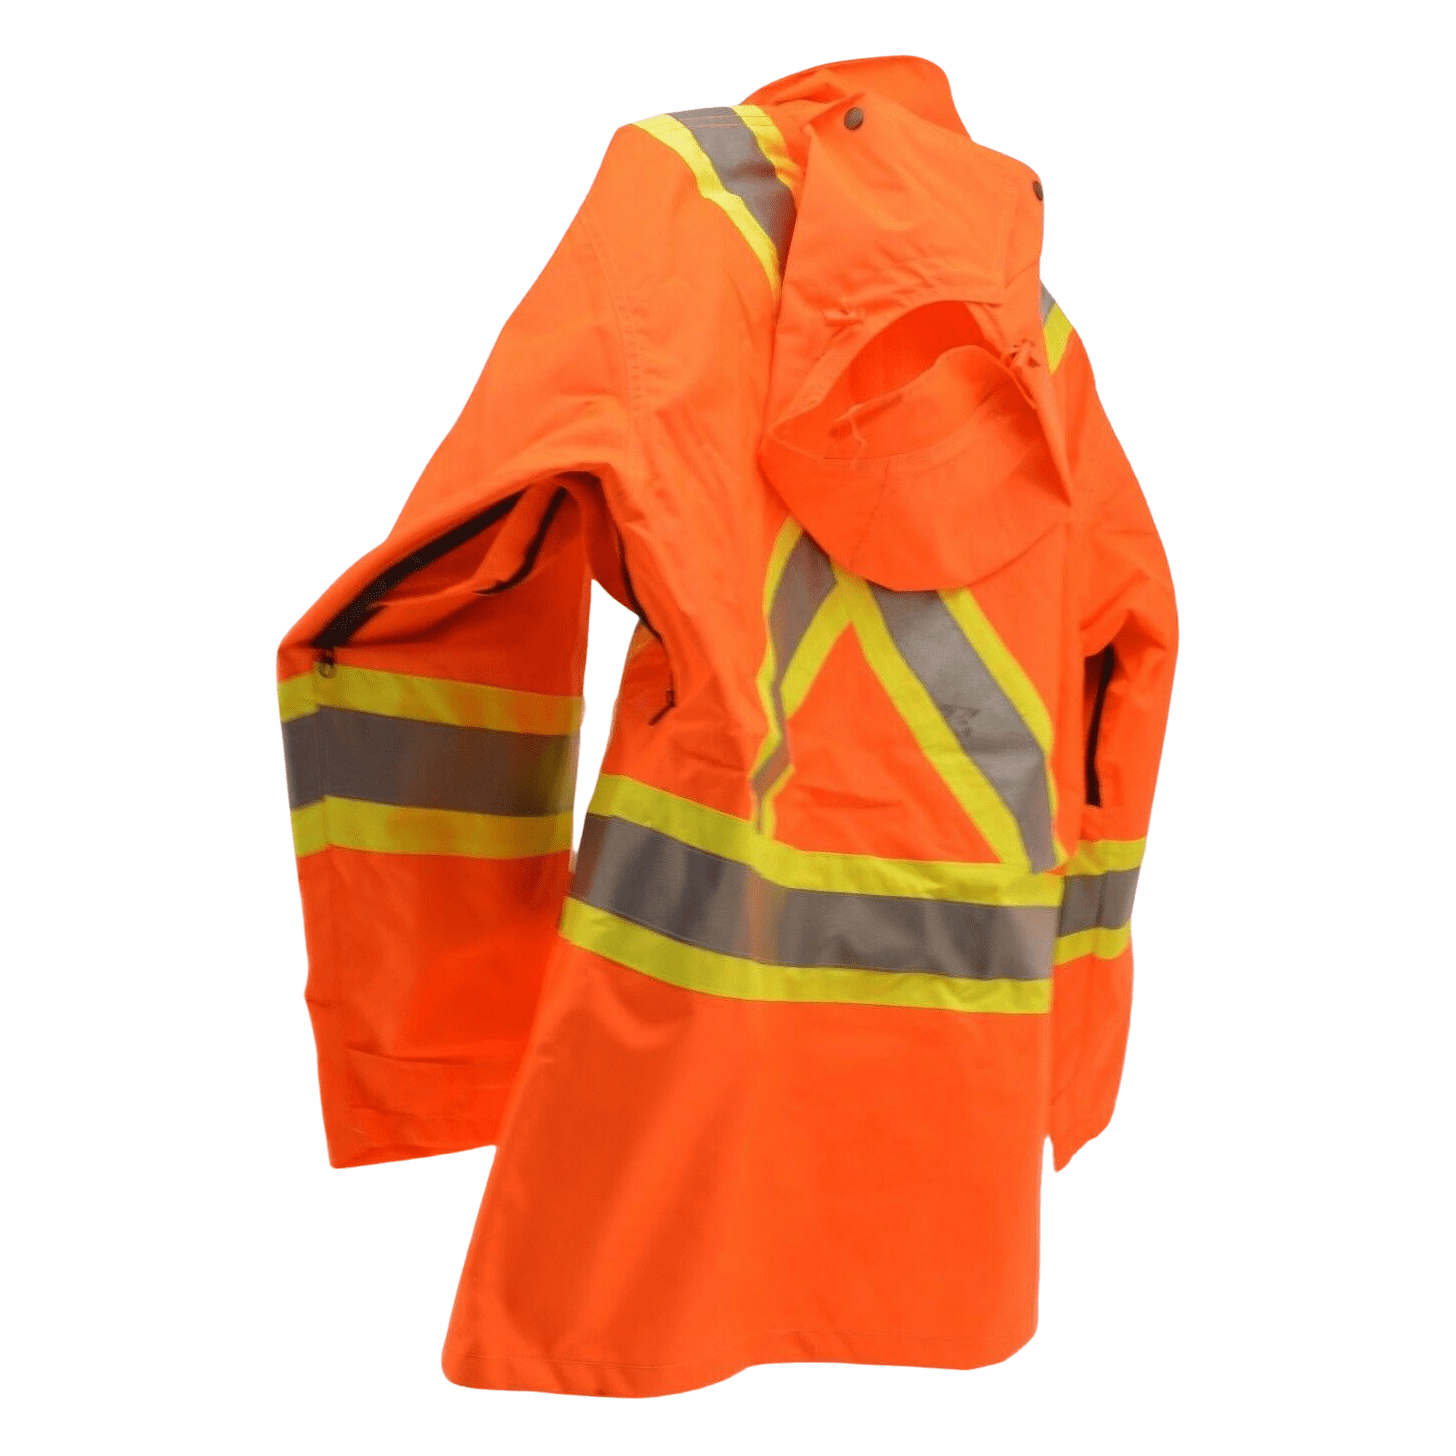 Condor men's 3-in-1 flagmans Safety jacket with removable fleece lining in size Large in high viz orange